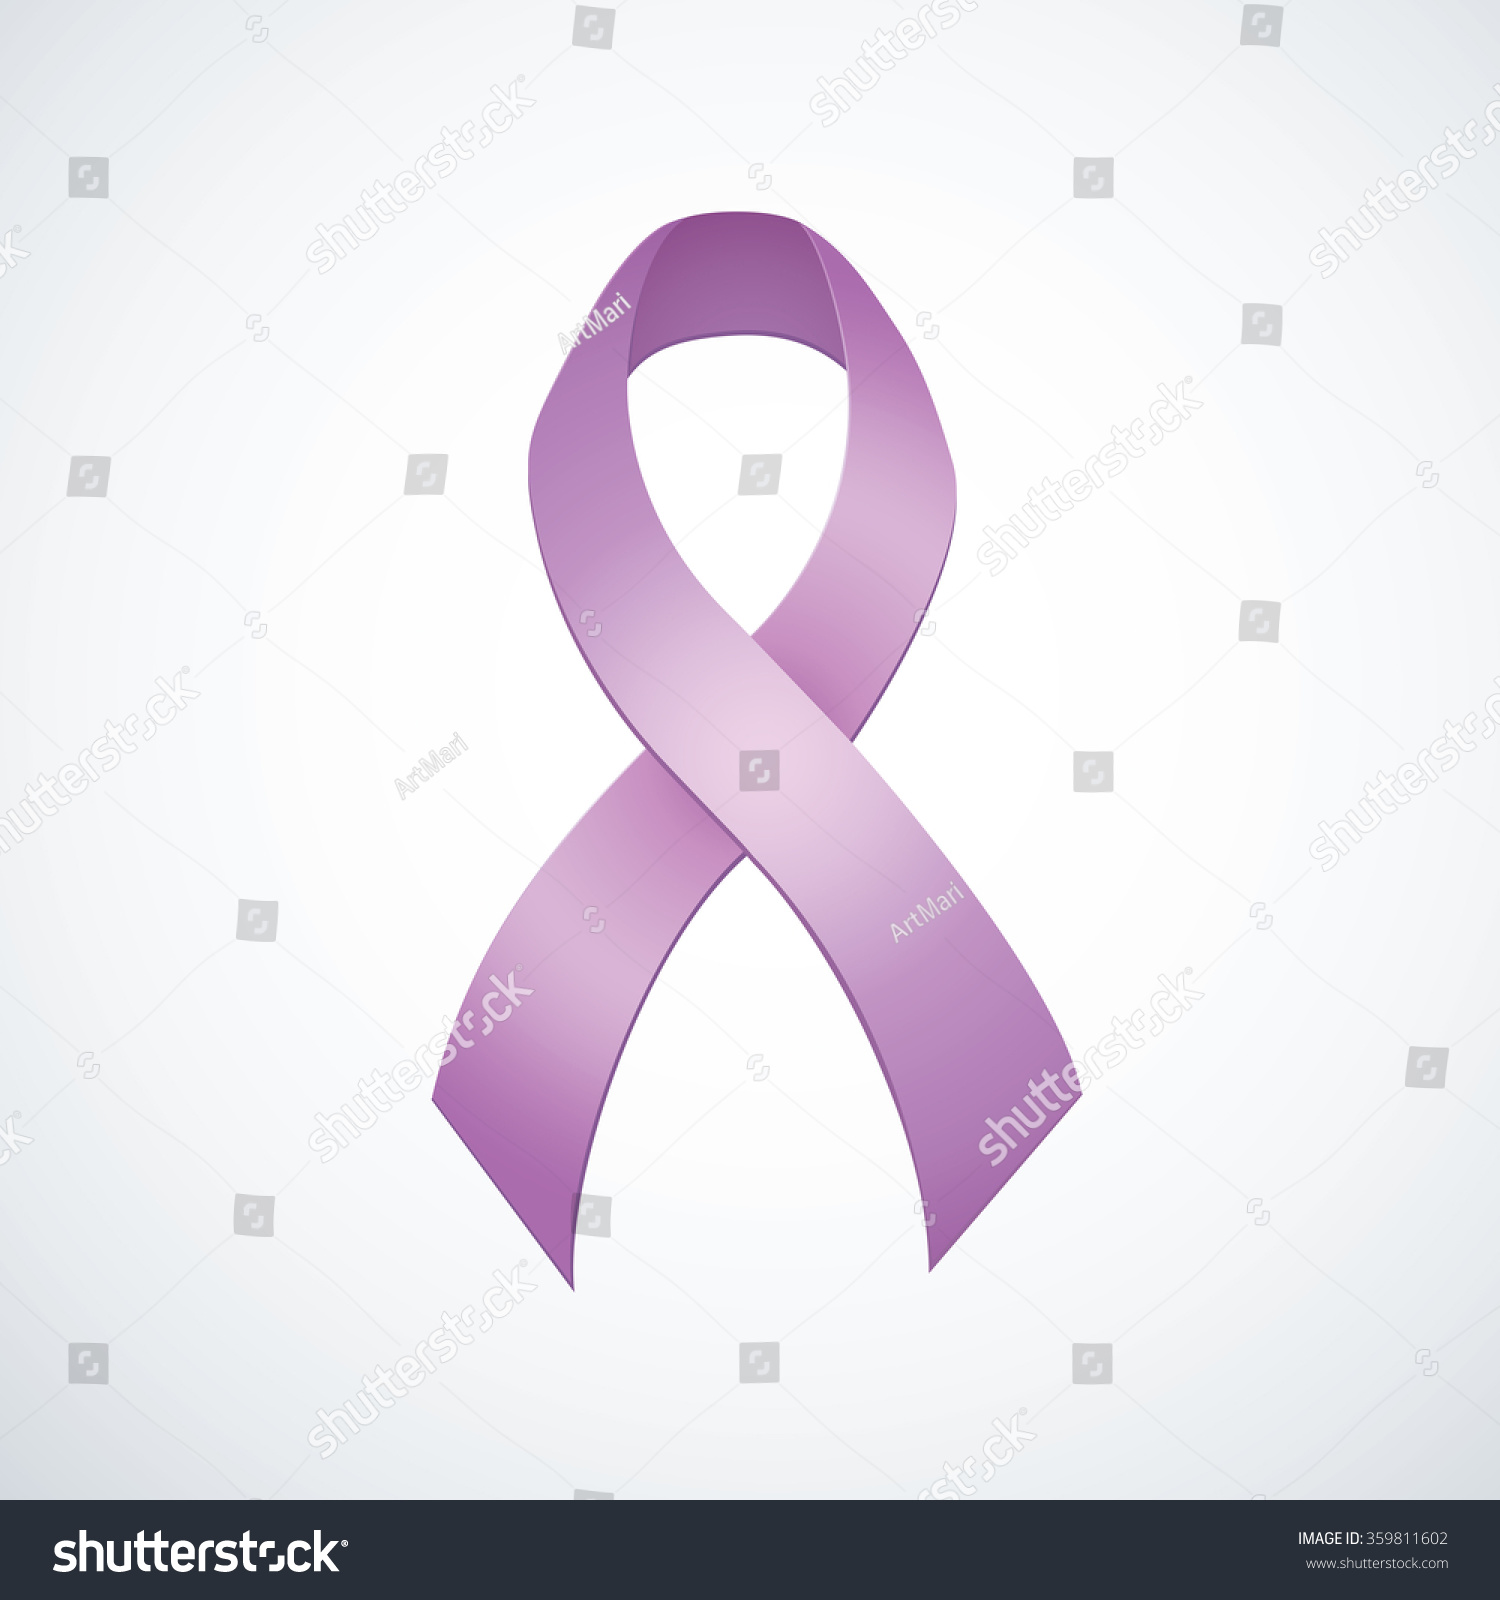 SVG of Issue logo loop symbolic concept problem of epilepsy, eating concern, craniofacial, esophageal, pulmonary hypertension, all kinds of tumors. Global icon bow light lilac color emblem isolated on white svg